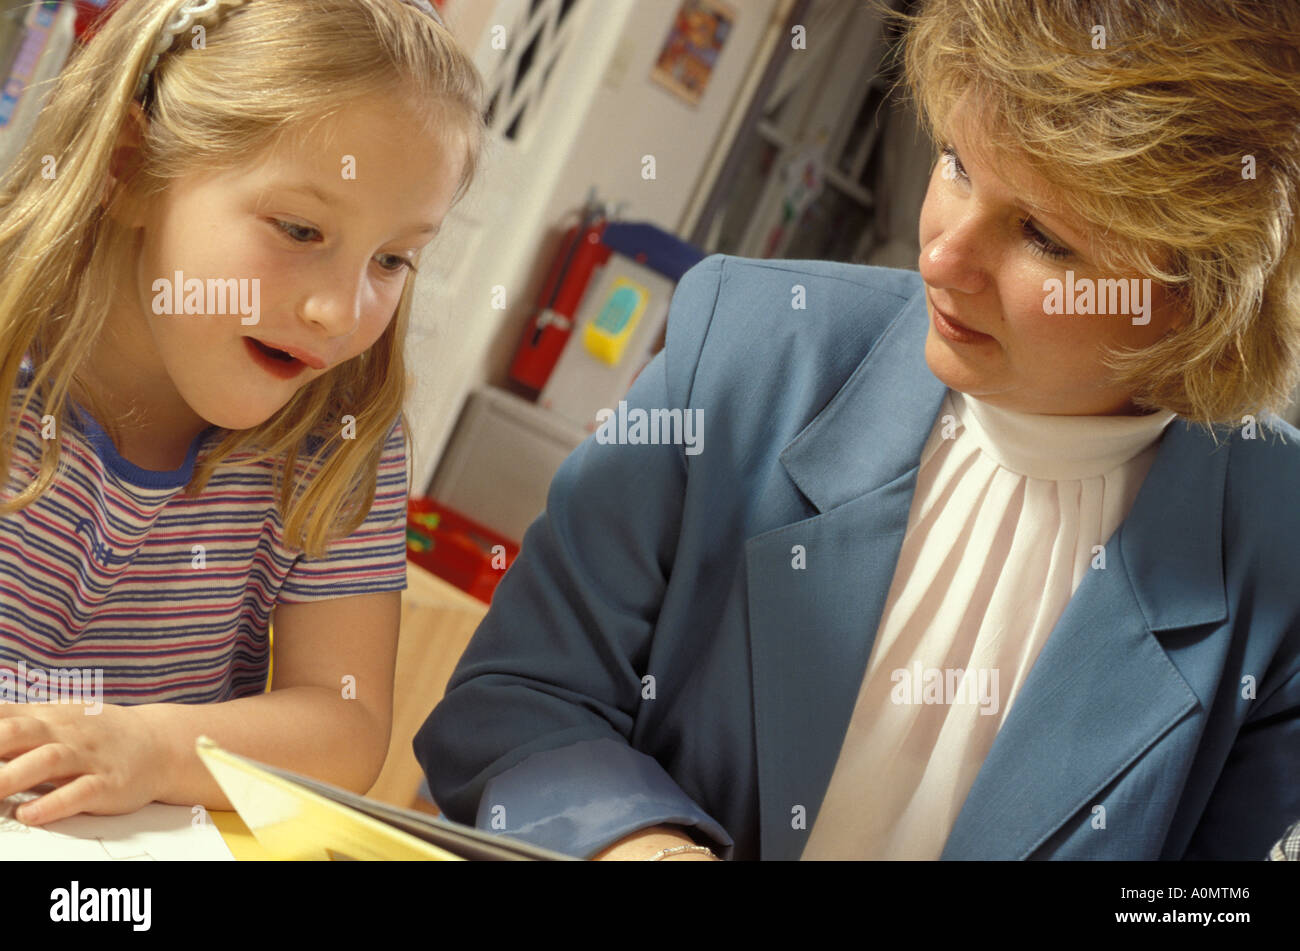 teacher administrator administrative young female girl student interact interaction Stock Photo